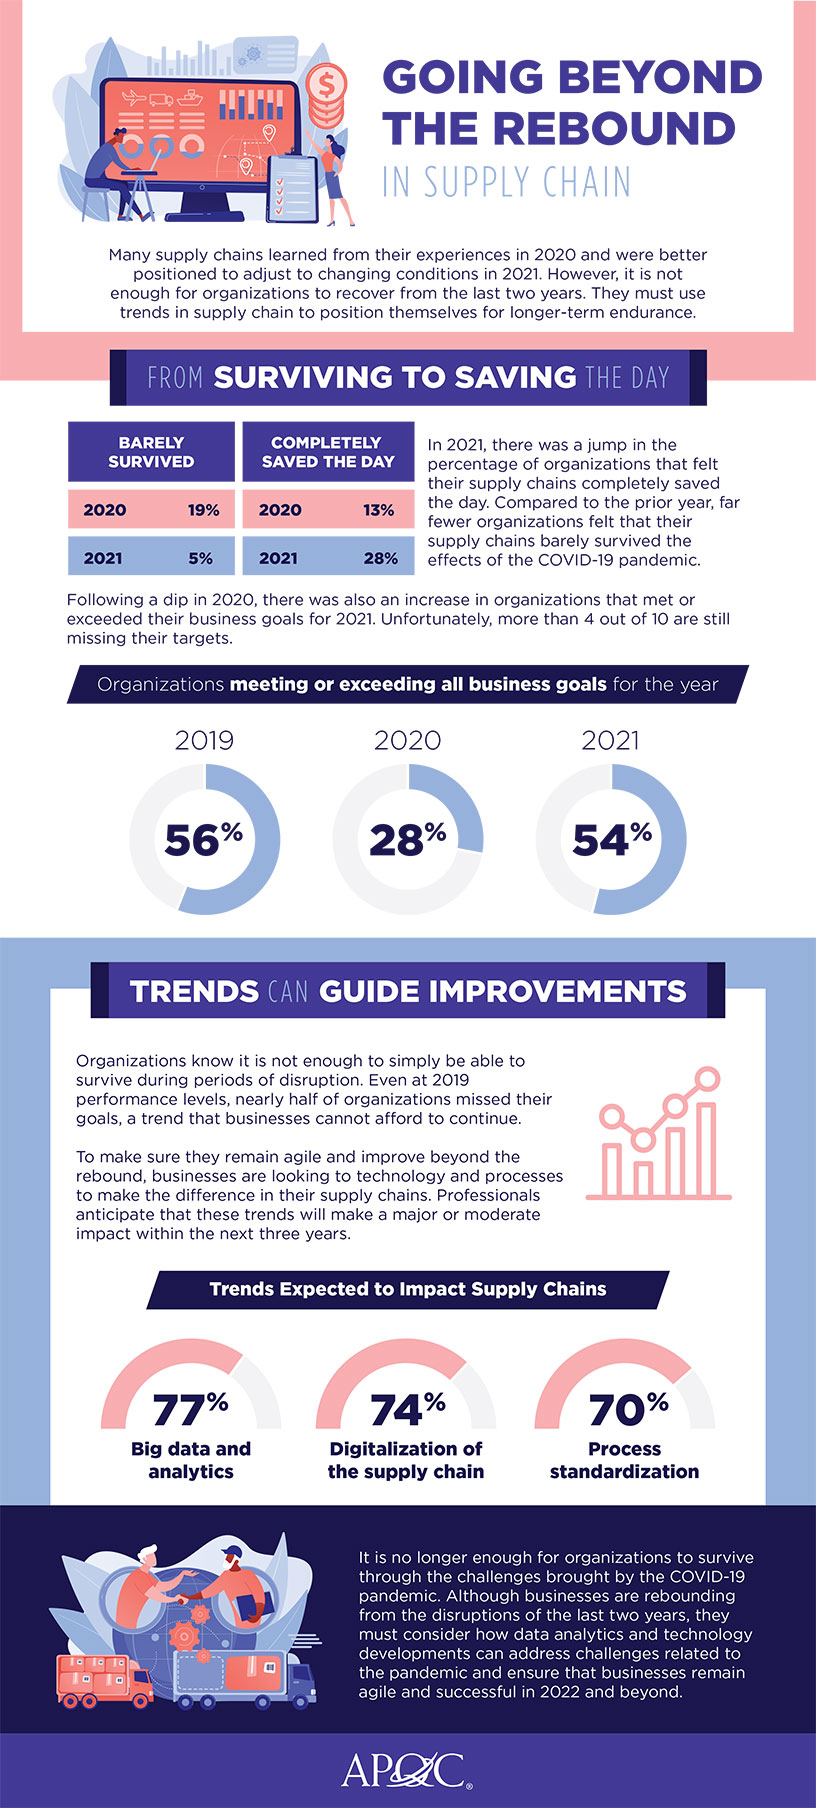 aqpc infographic: going beyond the rebound in supply chain – supply chain management review